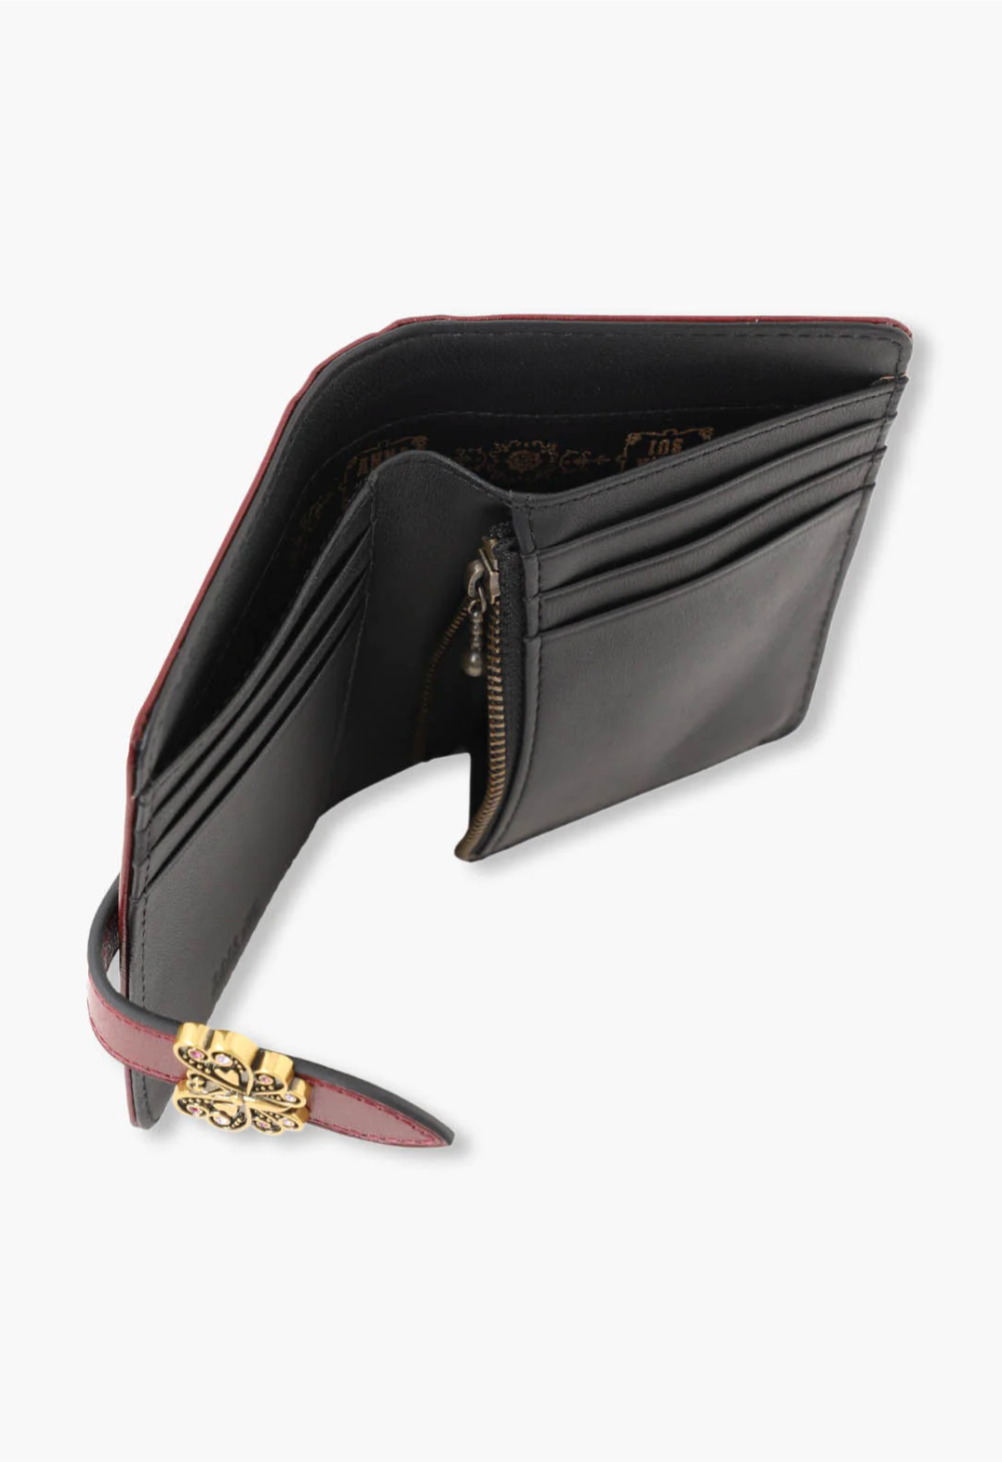 Small Roger Wallet wine, black inside, 6-card slots, 1 zipper compartment, open compartments